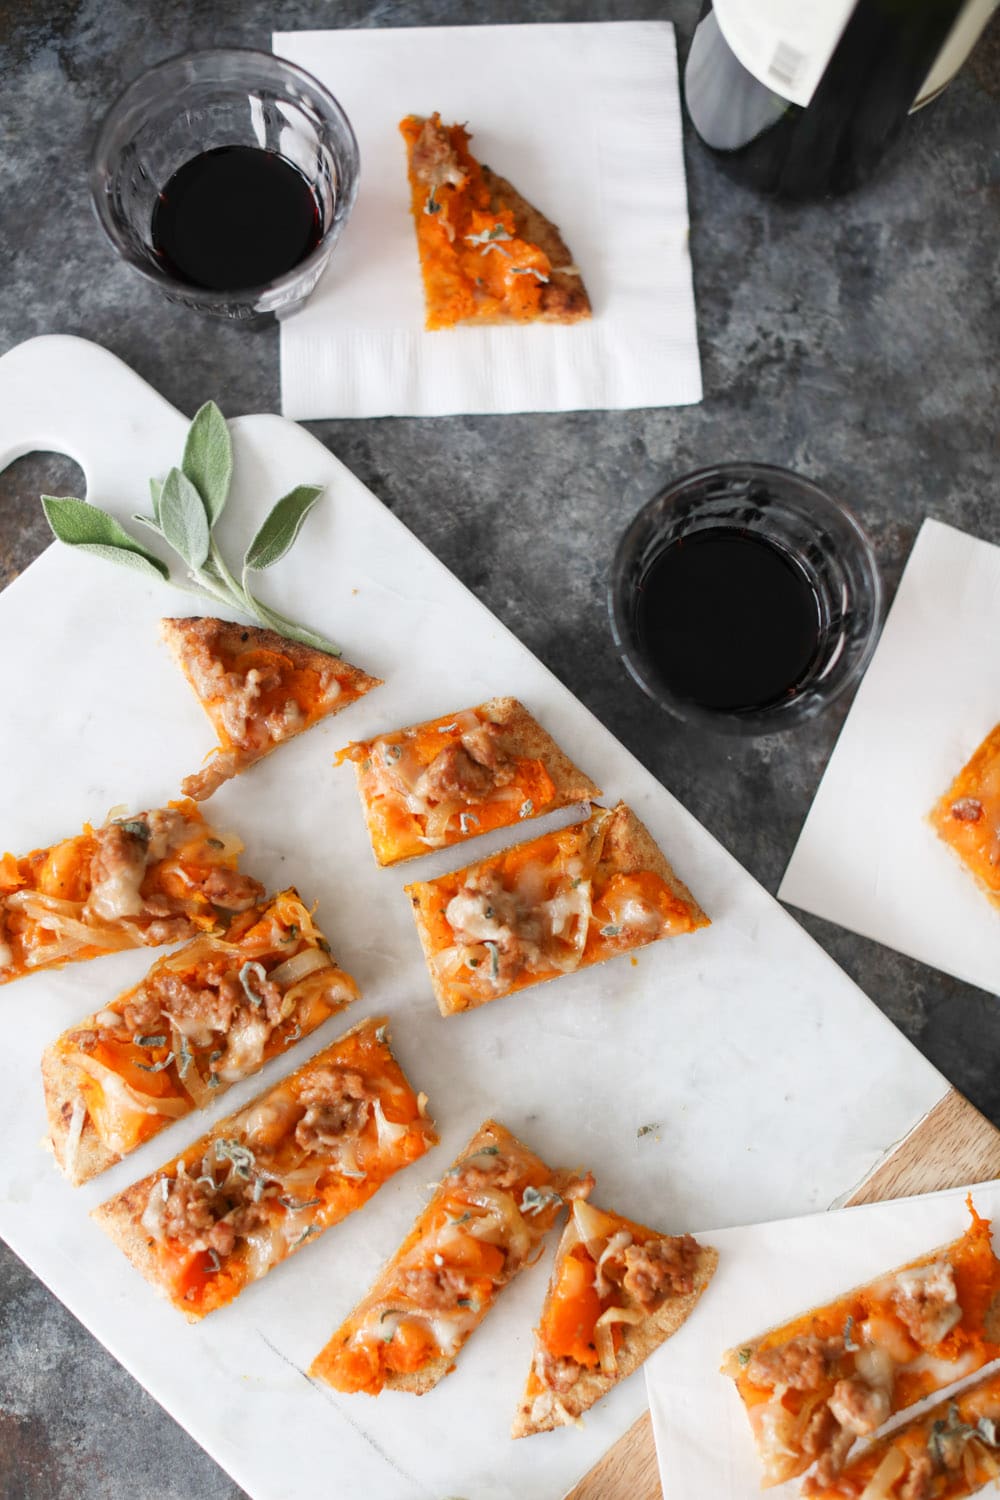 Butternut Squash Flatbread with Sausage and Caramelized Onions